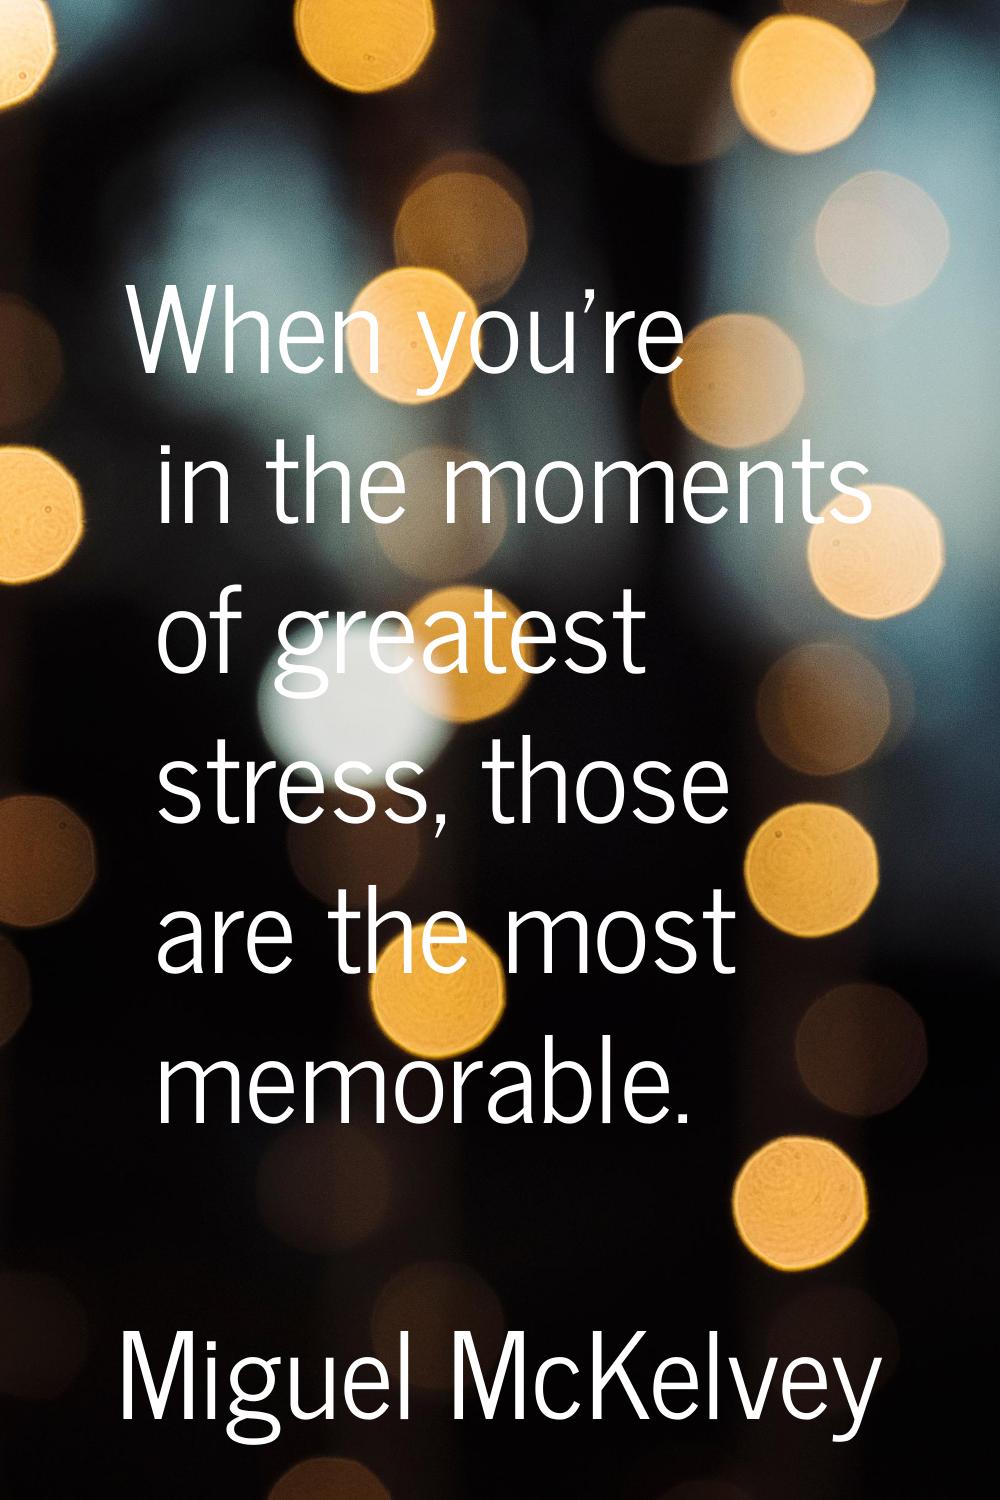 When you're in the moments of greatest stress, those are the most memorable.